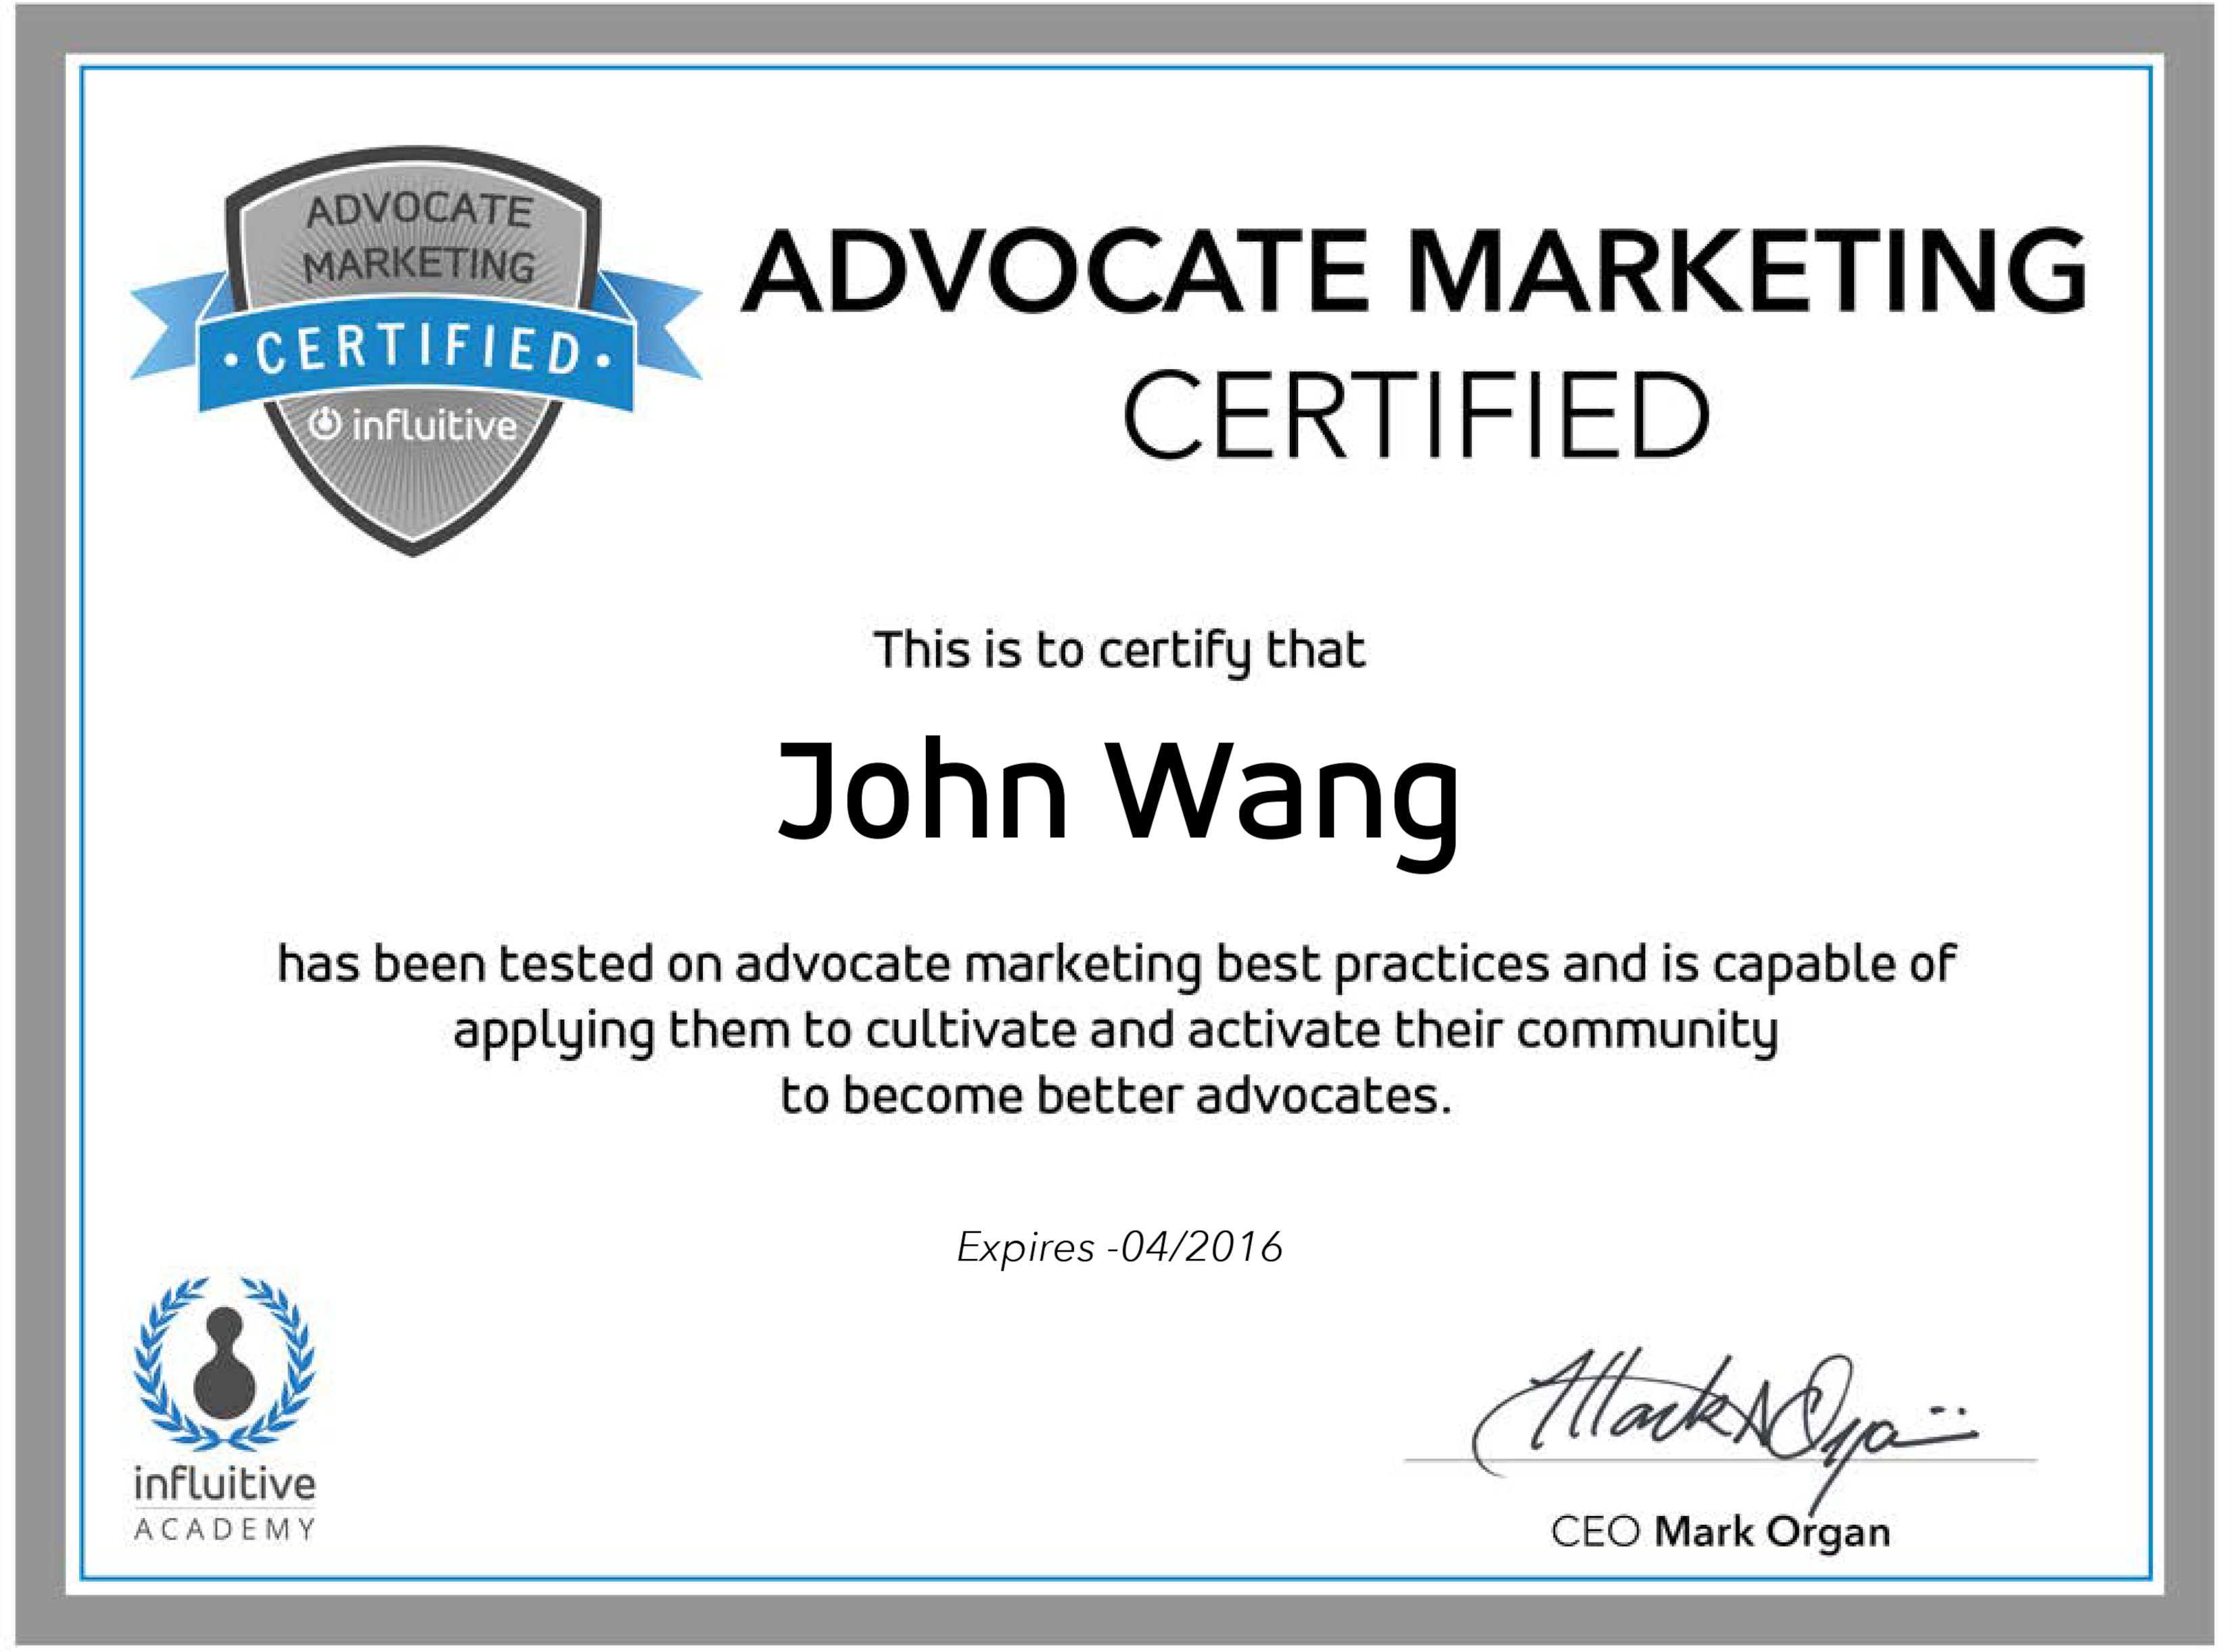 John's Advocate Marketing Certified from Influitive